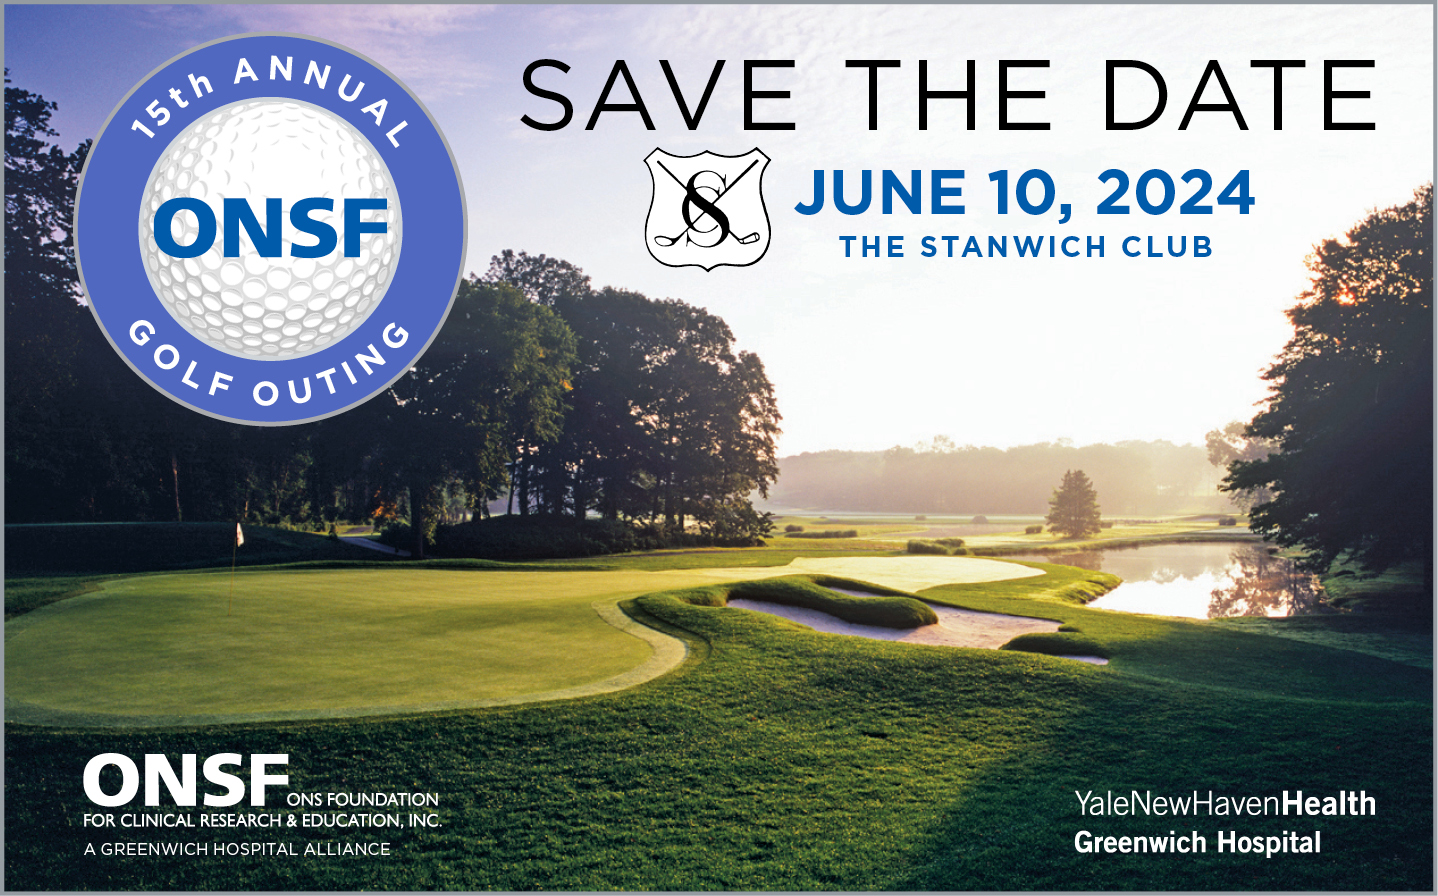 Save The Date! The 15th Annual ONSF Golf Outing is set for June 10, 2024 at the Stanwich Club